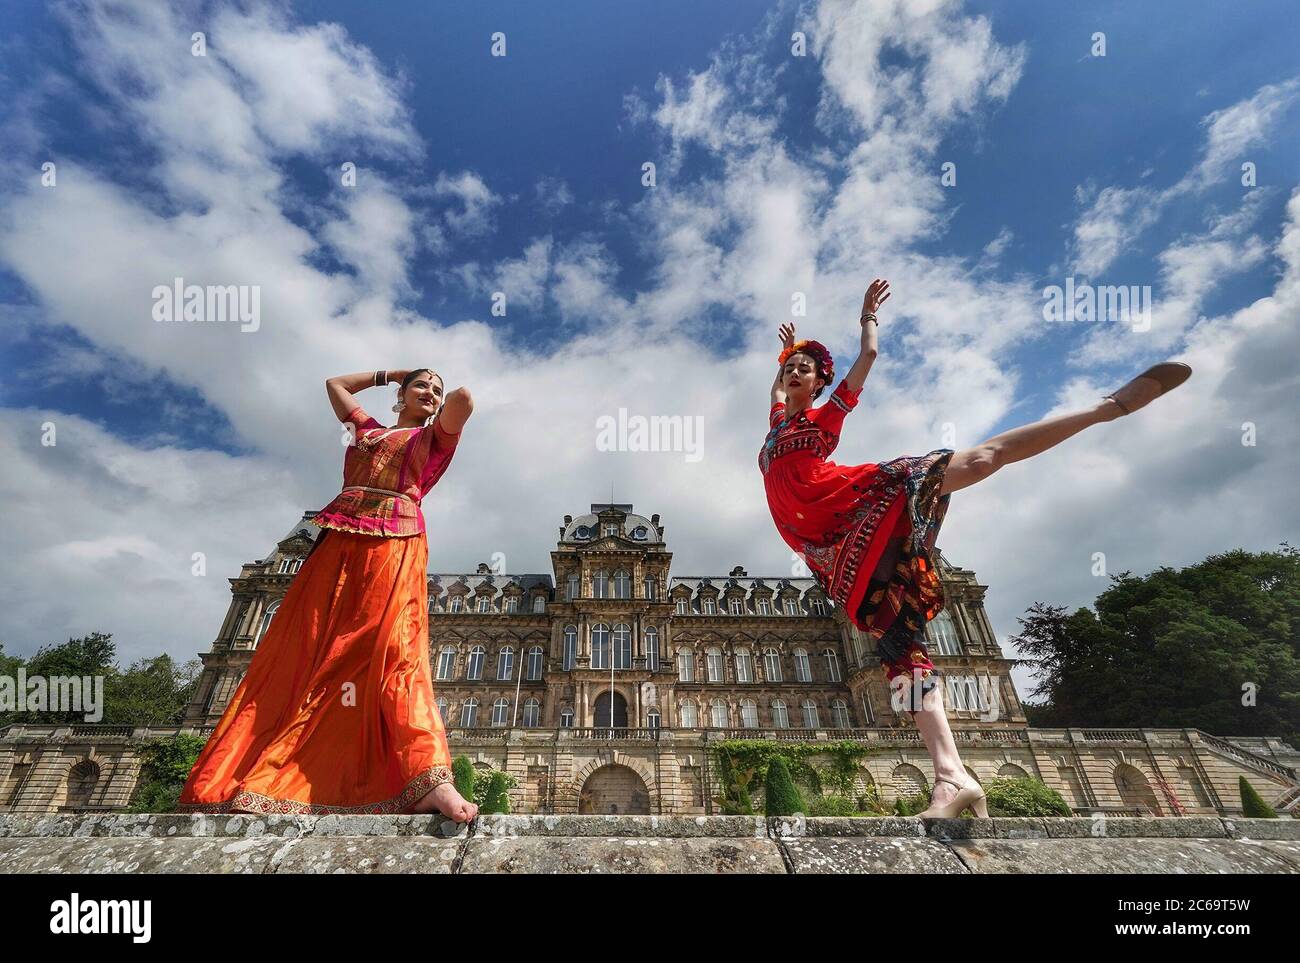 Dancers at The Bowes Museum in Barnard Castle, Durham, perform 'The Two Fridas', a dance and theatre work encompassing the life and times of Frida Kahlo and Amrita Sher-Gil which blends the cultural heritage and dance styles of Mexico, Hungary and India. Stock Photo